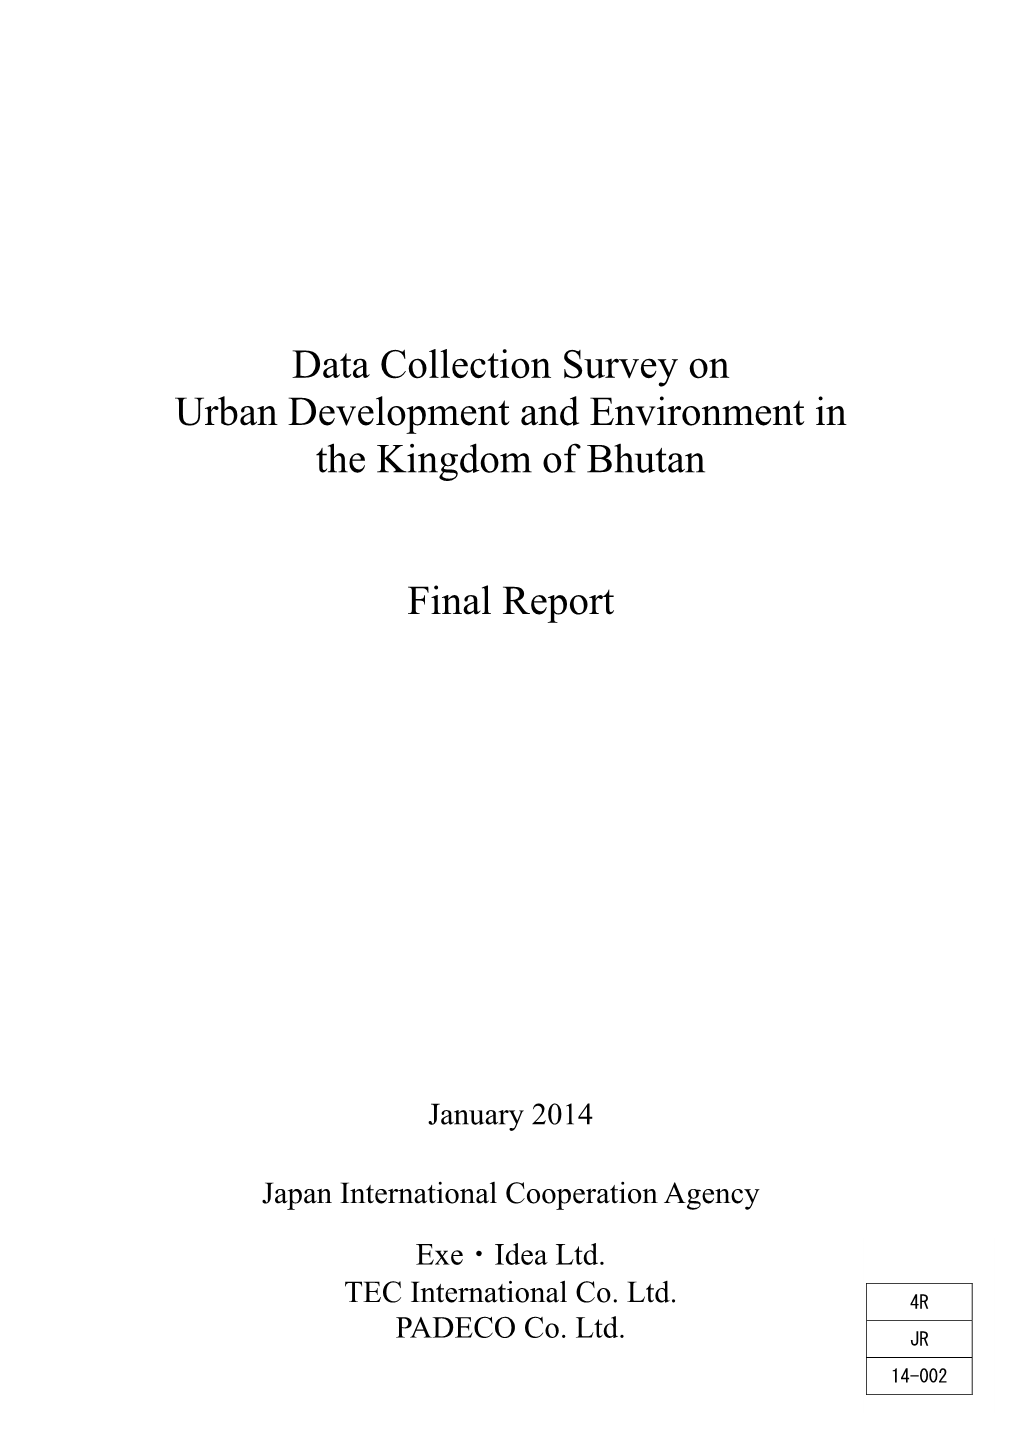 Data Collection Survey on Urban Development and Environment in the Kingdom of Bhutan